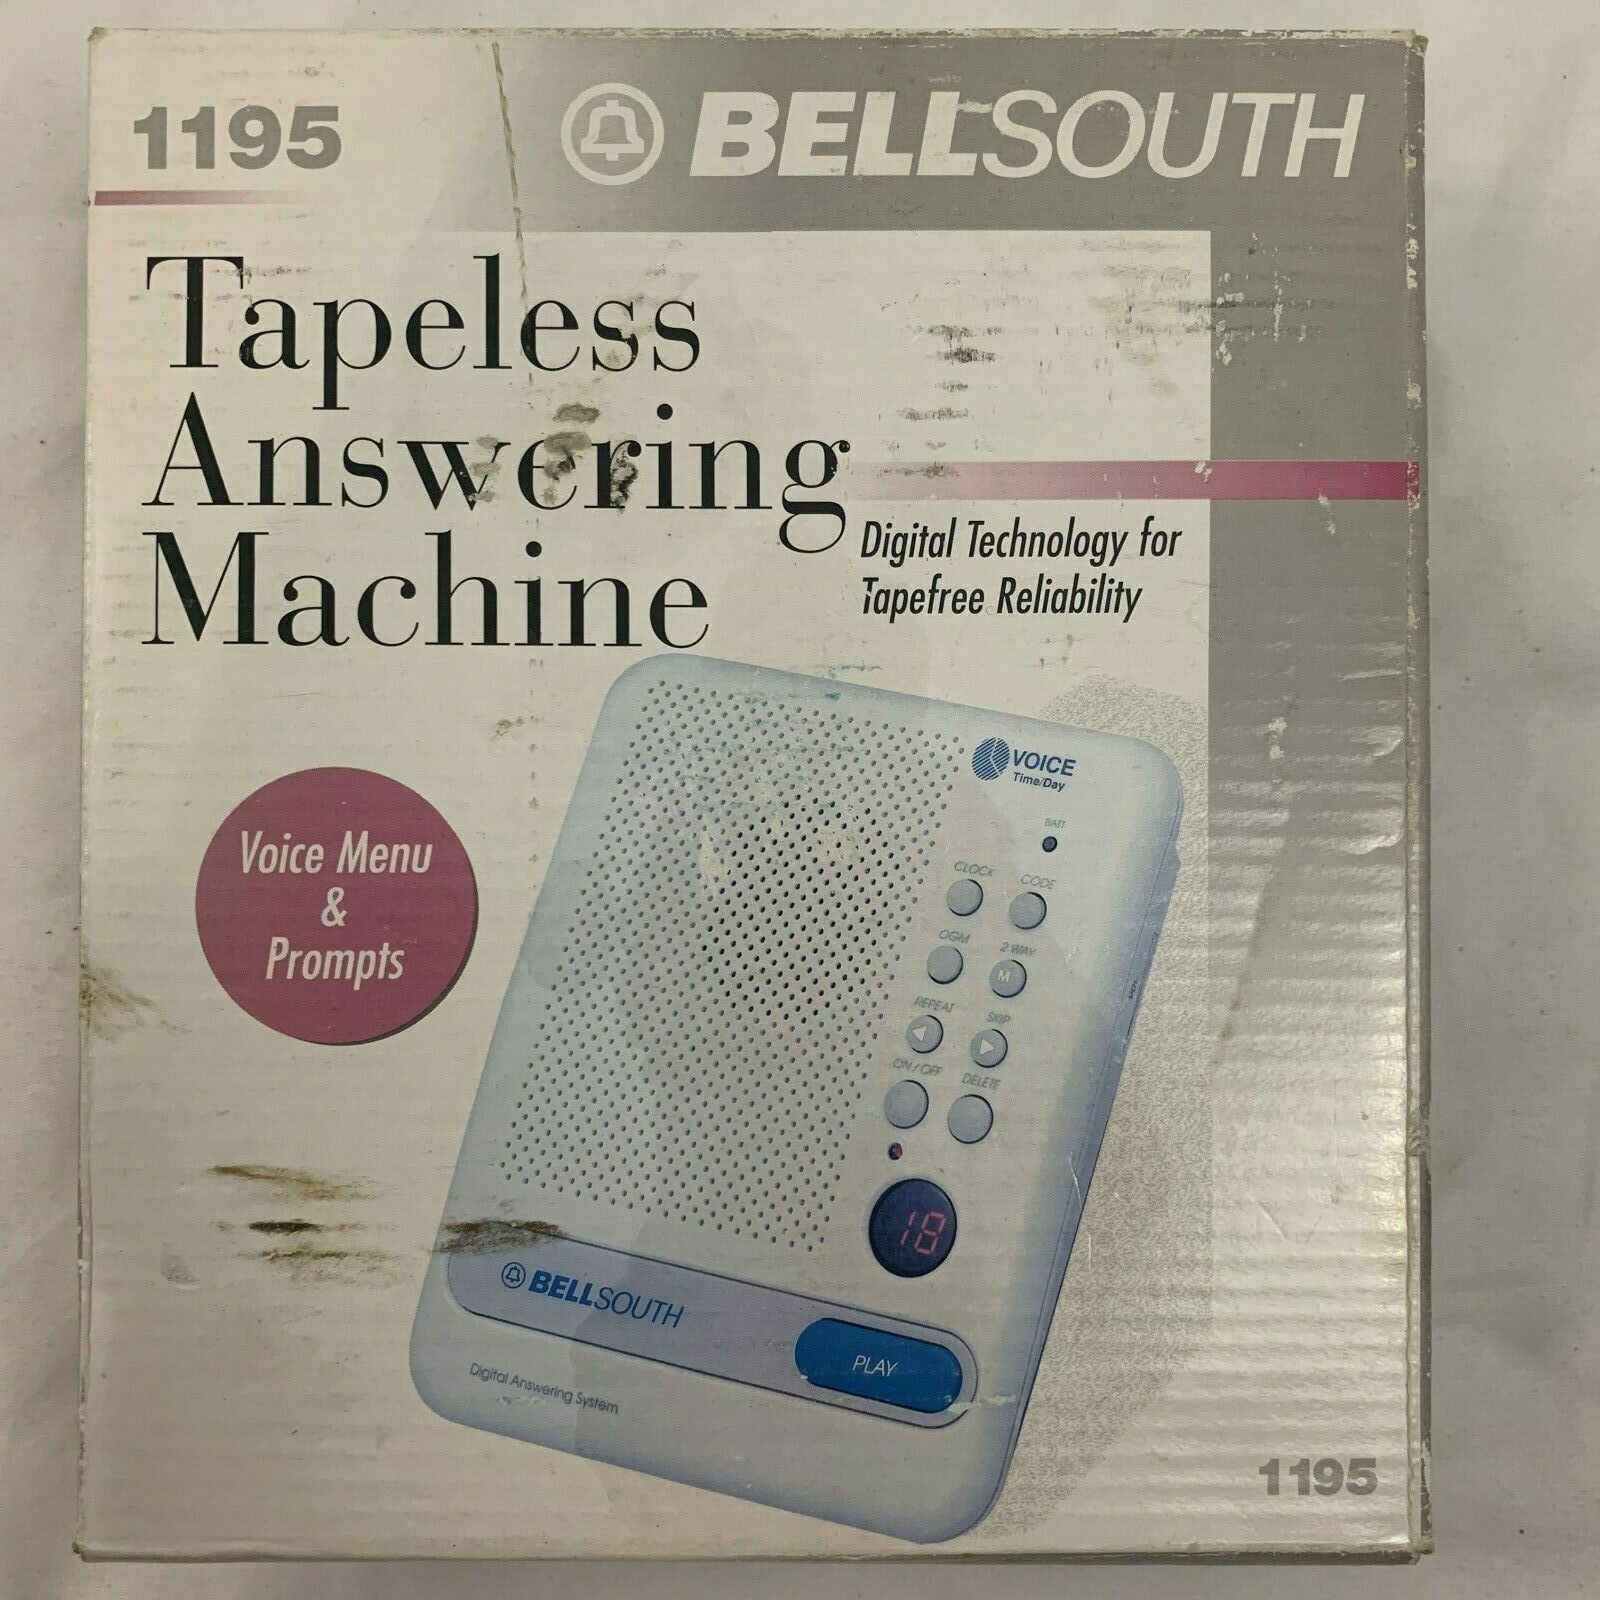 Bellsouth Tapeless Answering Machine 1195 Digital, Vintage 1995 White New